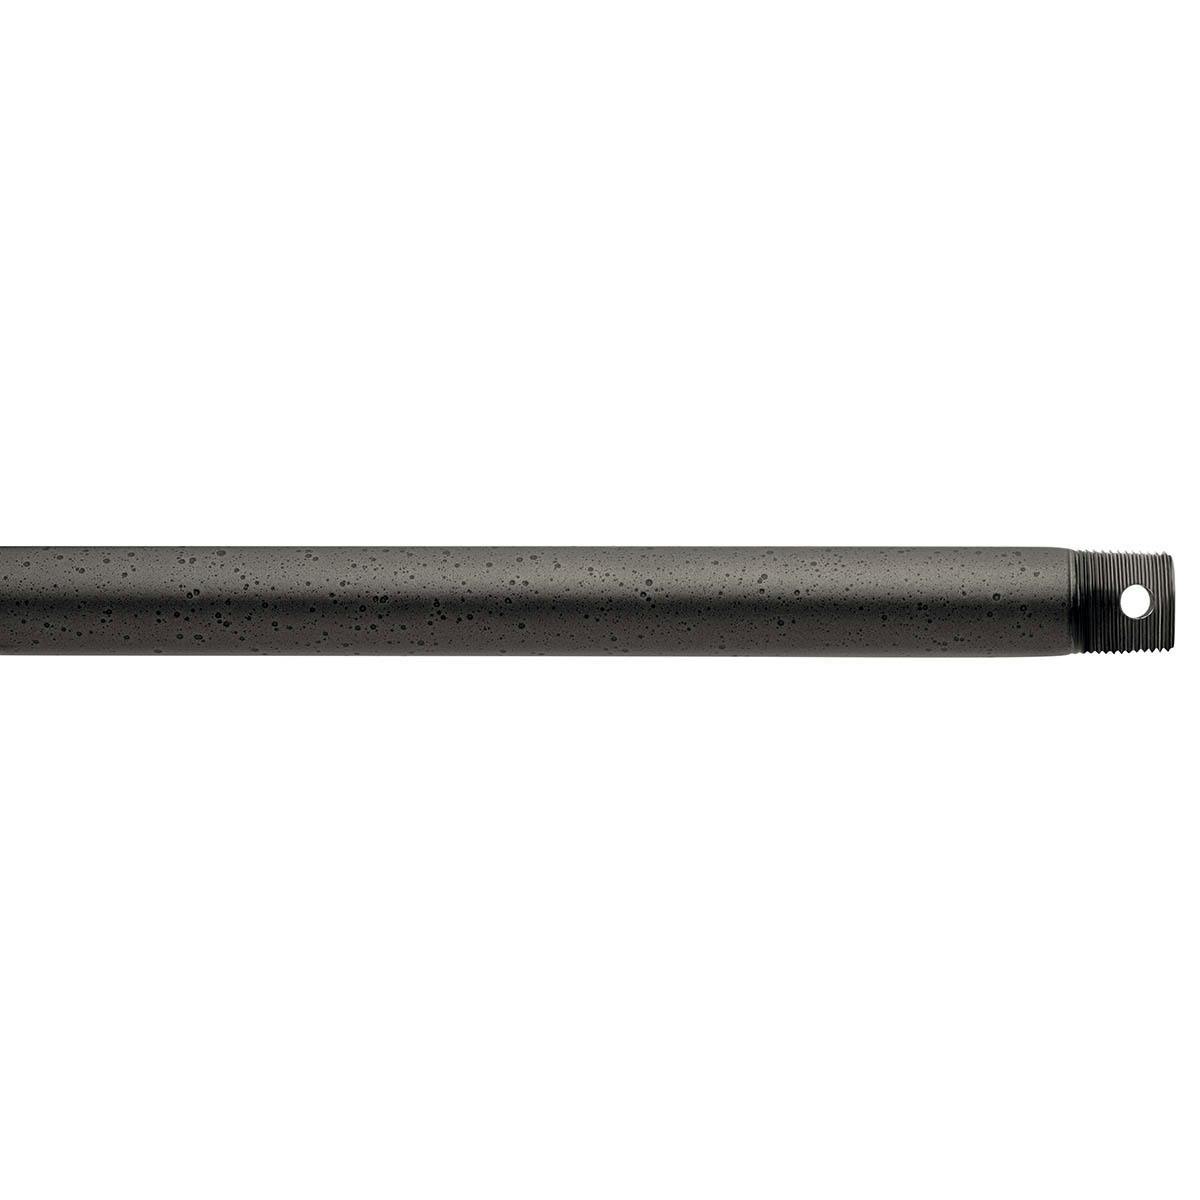 Dual Threaded 72" Downrod Anvil Iron on a white background